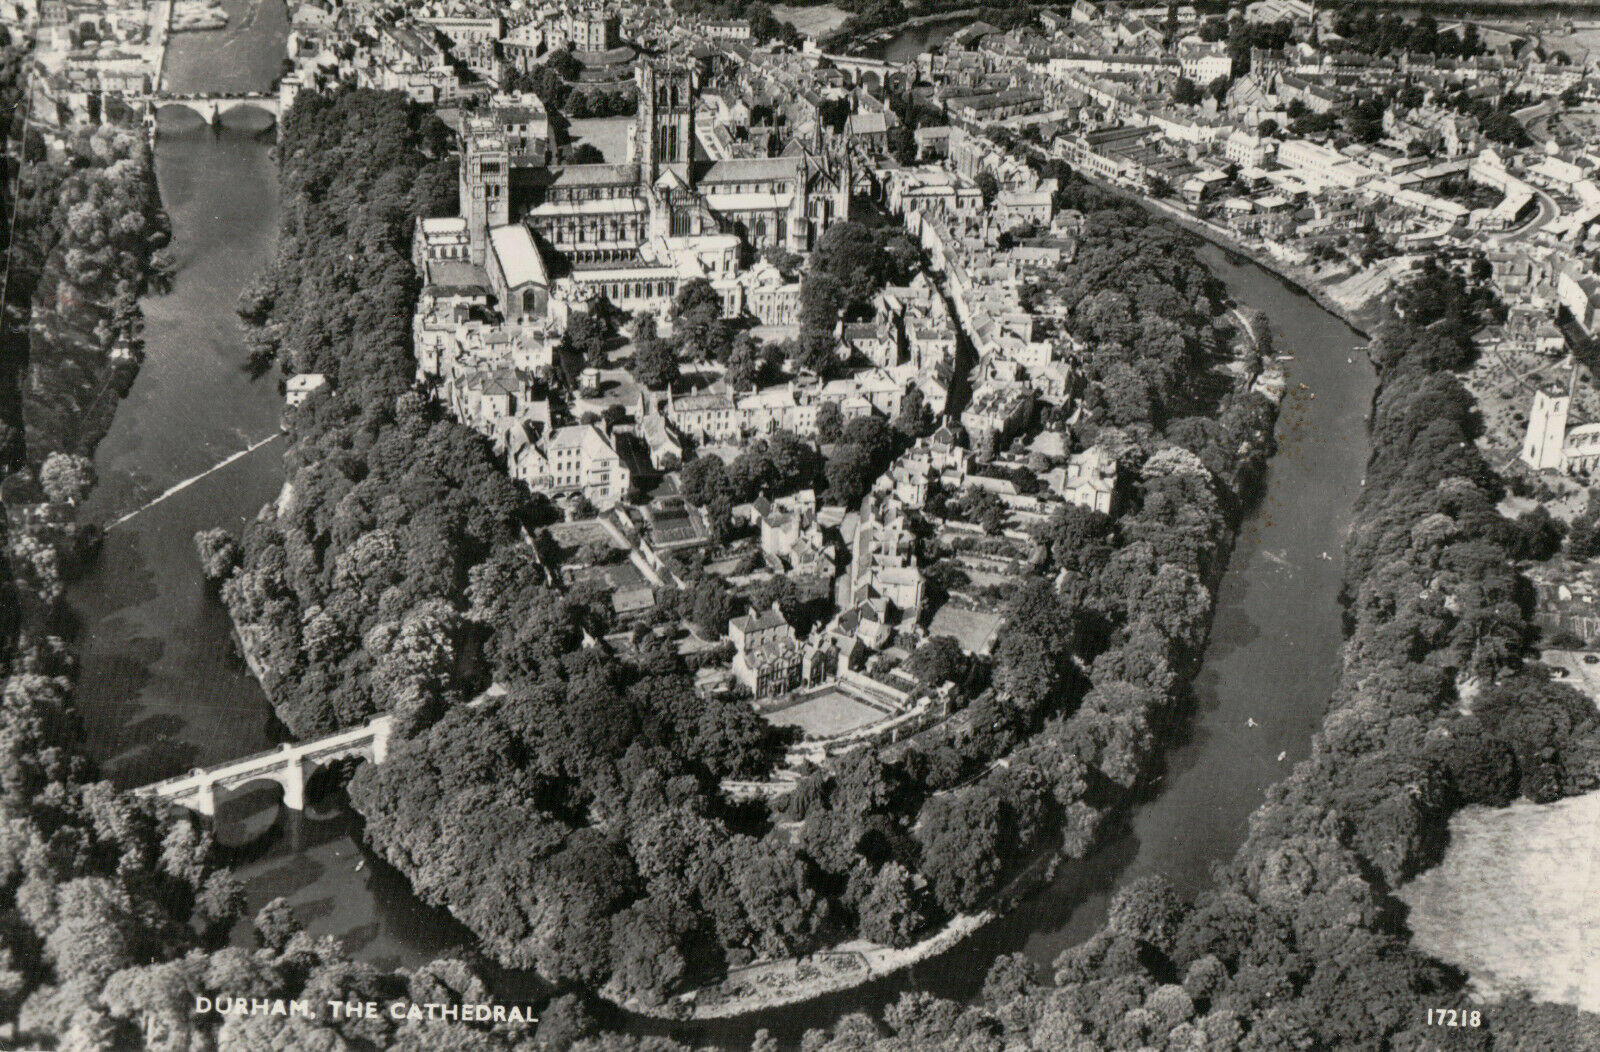 House Clearance - Service Aerial View of Cathedral, Castle, University, River Wear,  Durham